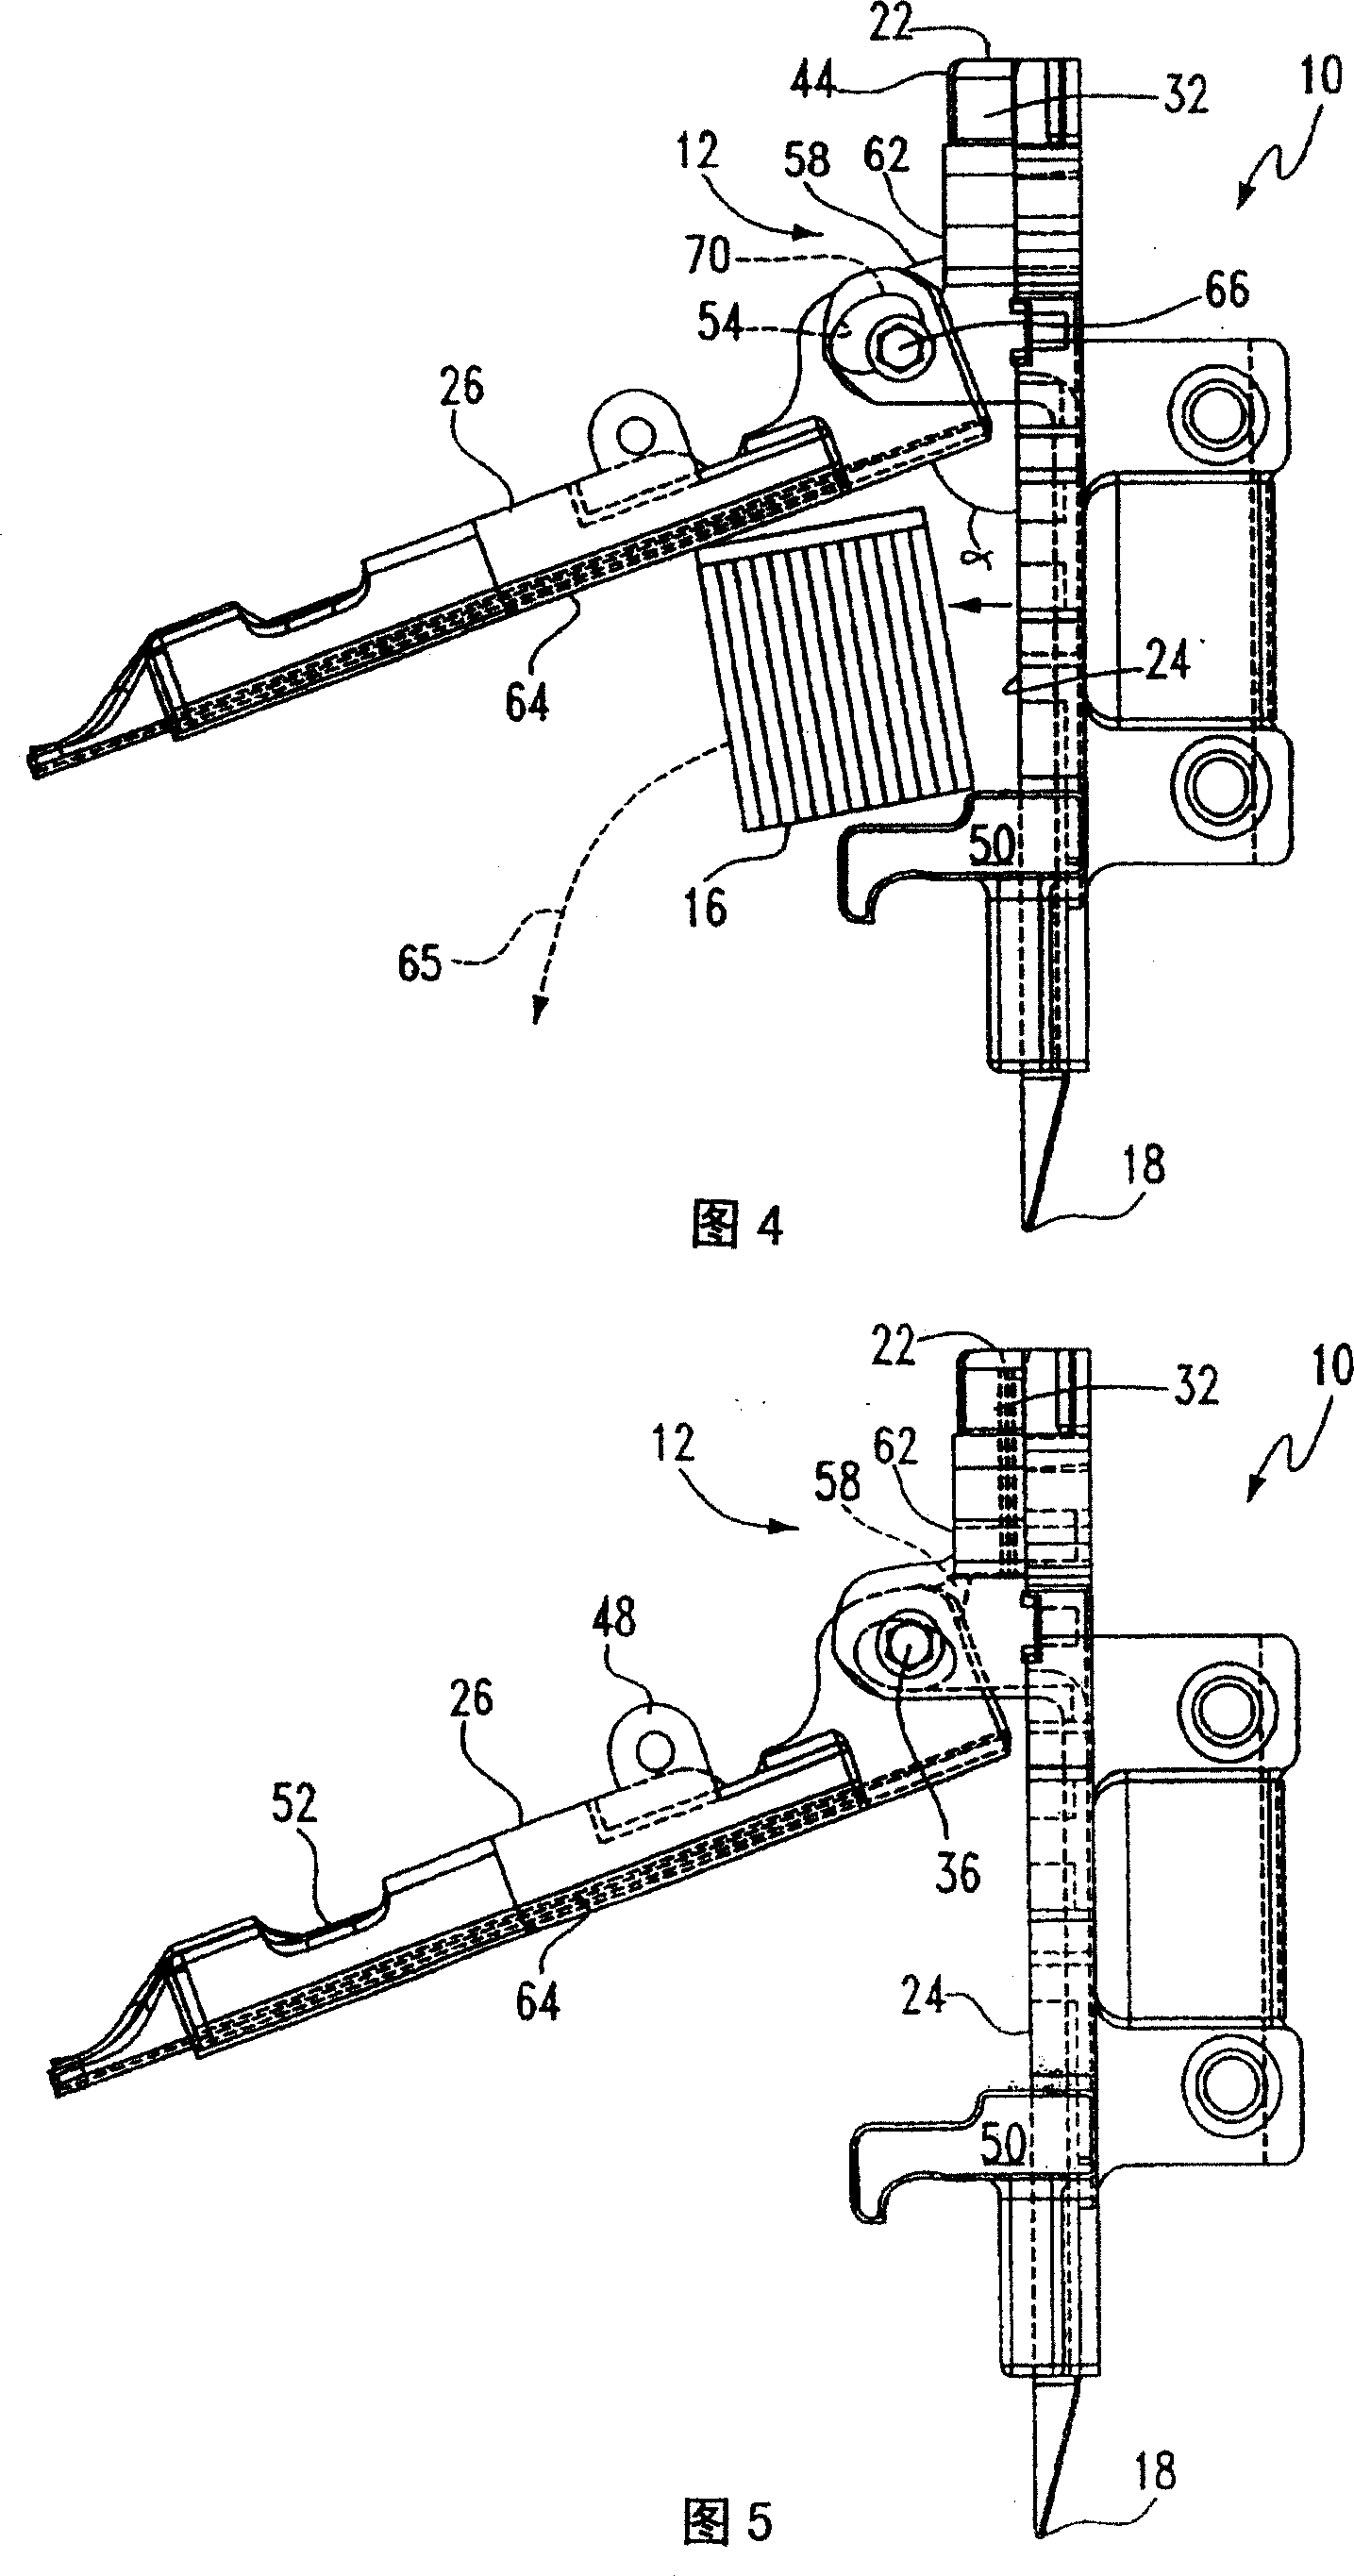 Fitting-up fastenr driving tool